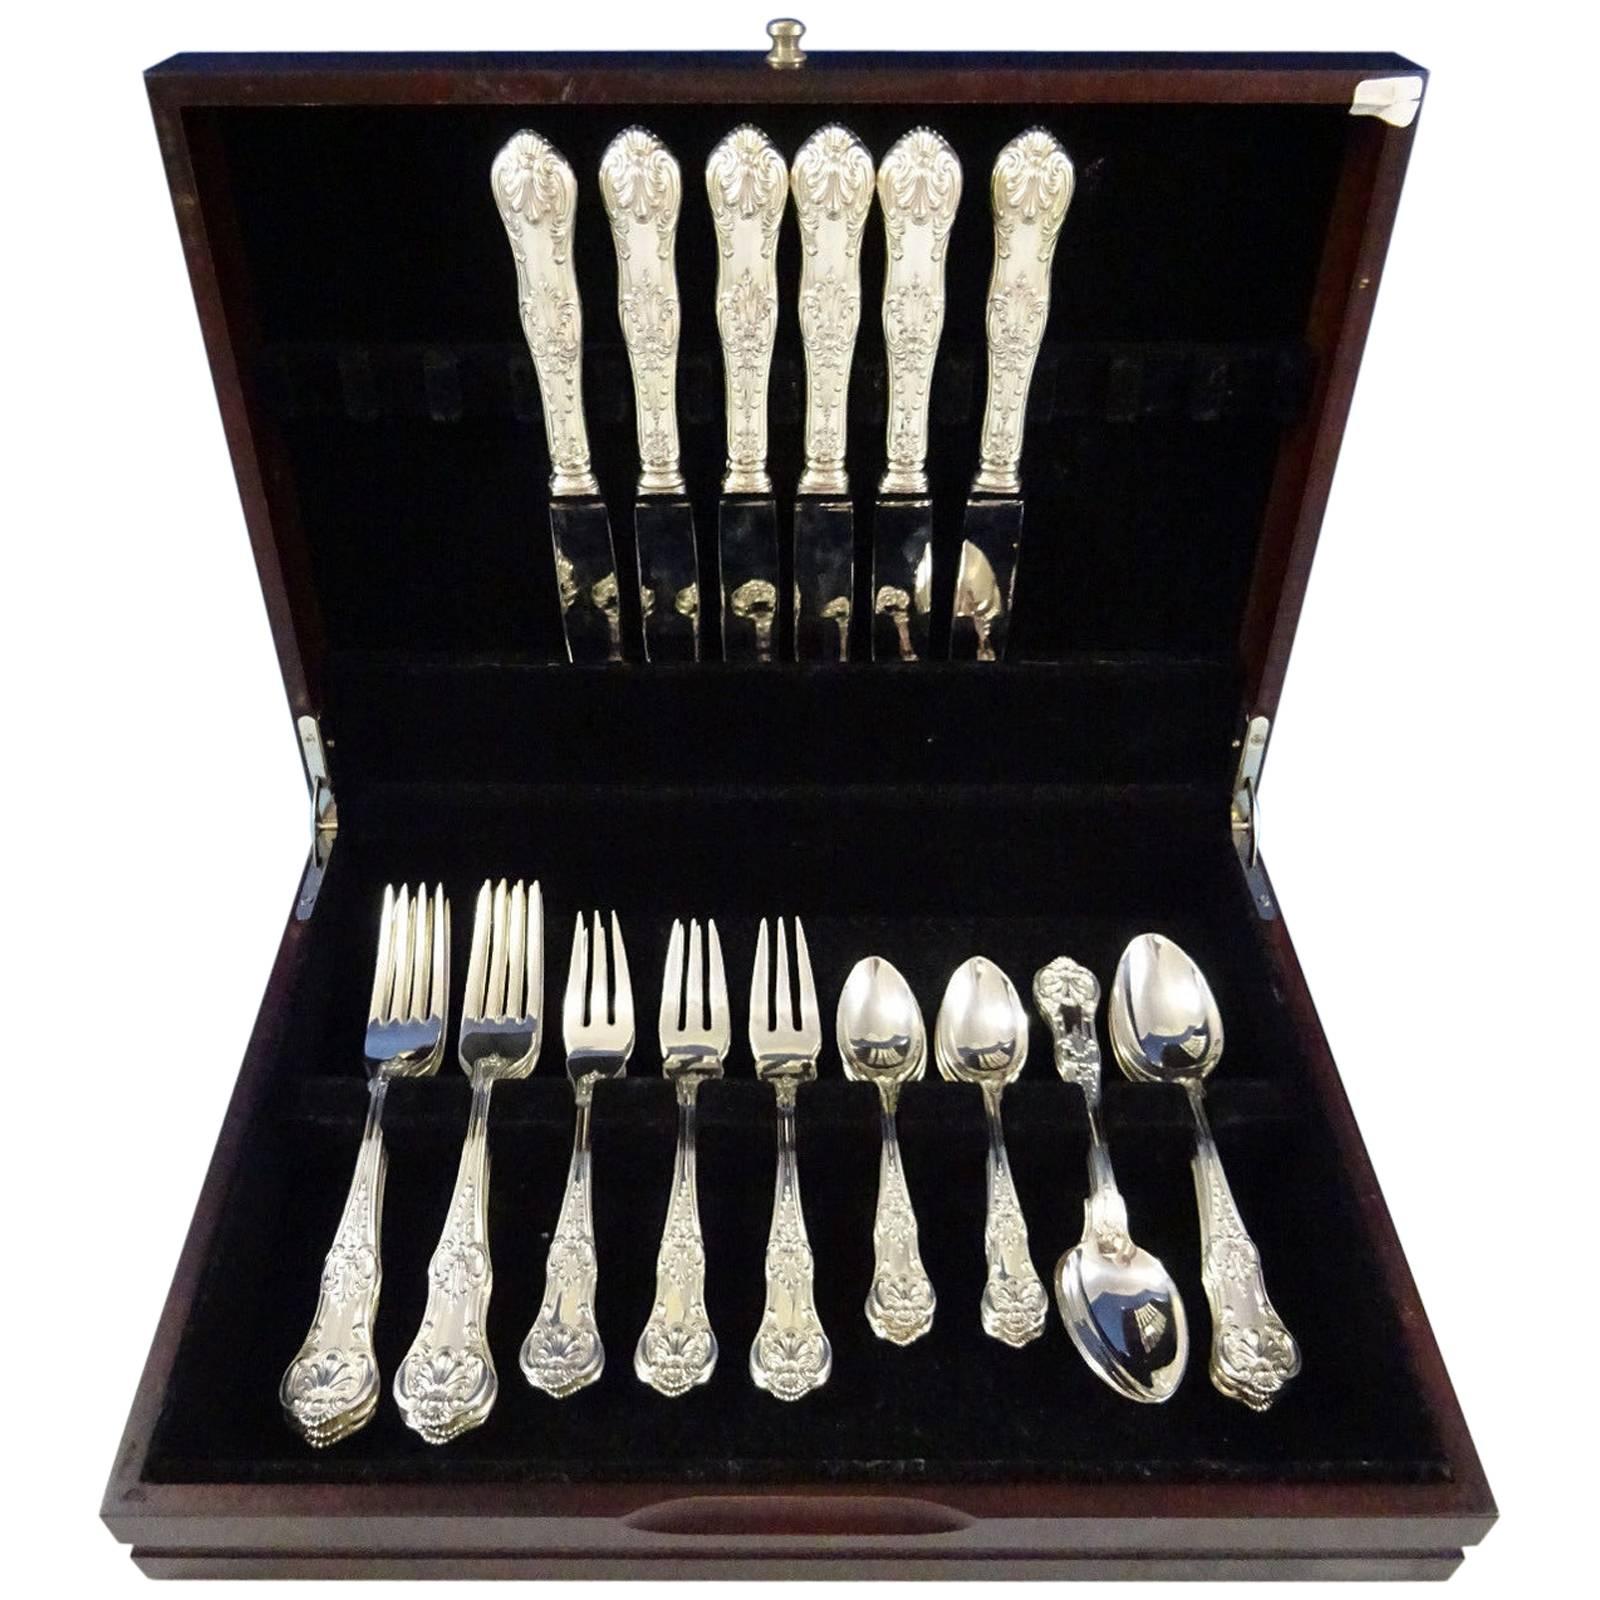 Lorena (kings/queens style pattern) by Cassetti, Italy sterling silver flatware set of 30 pieces. This pattern features a Classic shell motif. The pieces are large and heavy. This set includes:

Six dinner size knives, 10